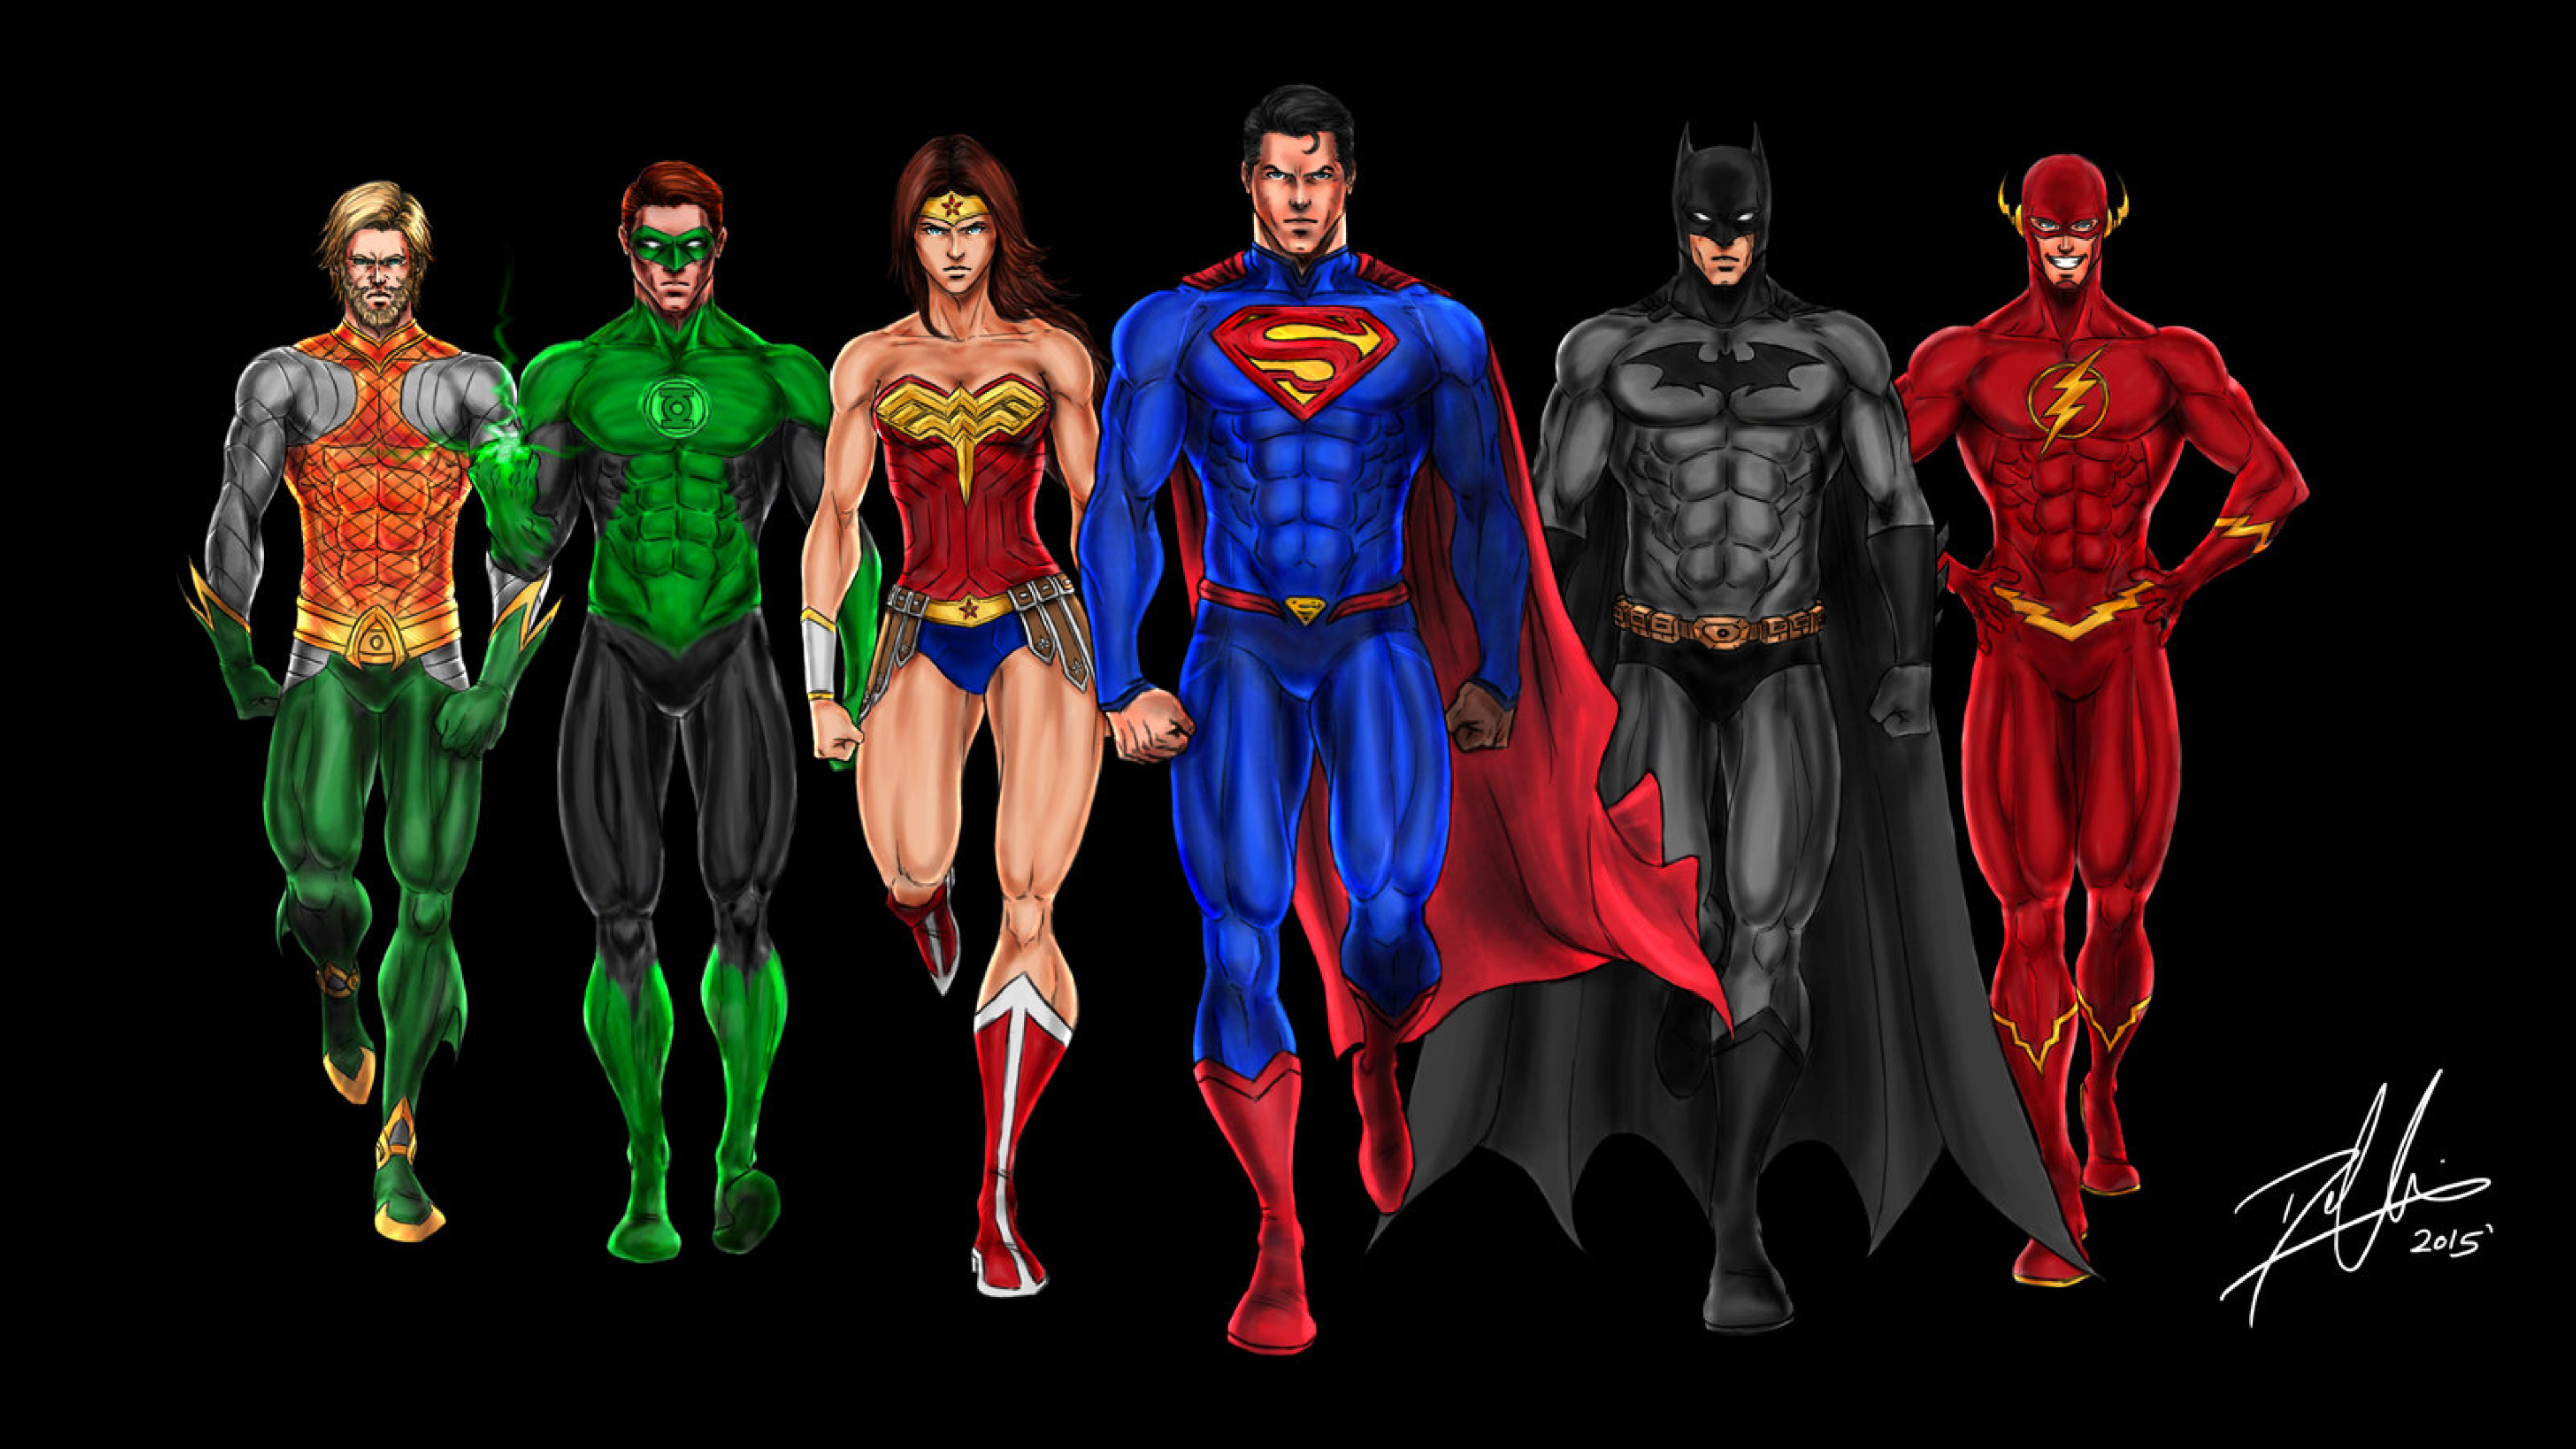 justice league fan art 2017 1536520252 - Justice League Fan Art 2017 - wonder woman wallpapers, superman wallpapers, superheroes wallpapers, justice league wallpapers, hd-wallpapers, green lantern wallpapers, flash wallpapers, digital art wallpapers, deviantart wallpapers, cyborg wallpapers, comics wallpapers, batman wallpapers, artist wallpapers, art wallpapers, aquaman wallpapers, 5k wallpapers, 4k-wallpapers